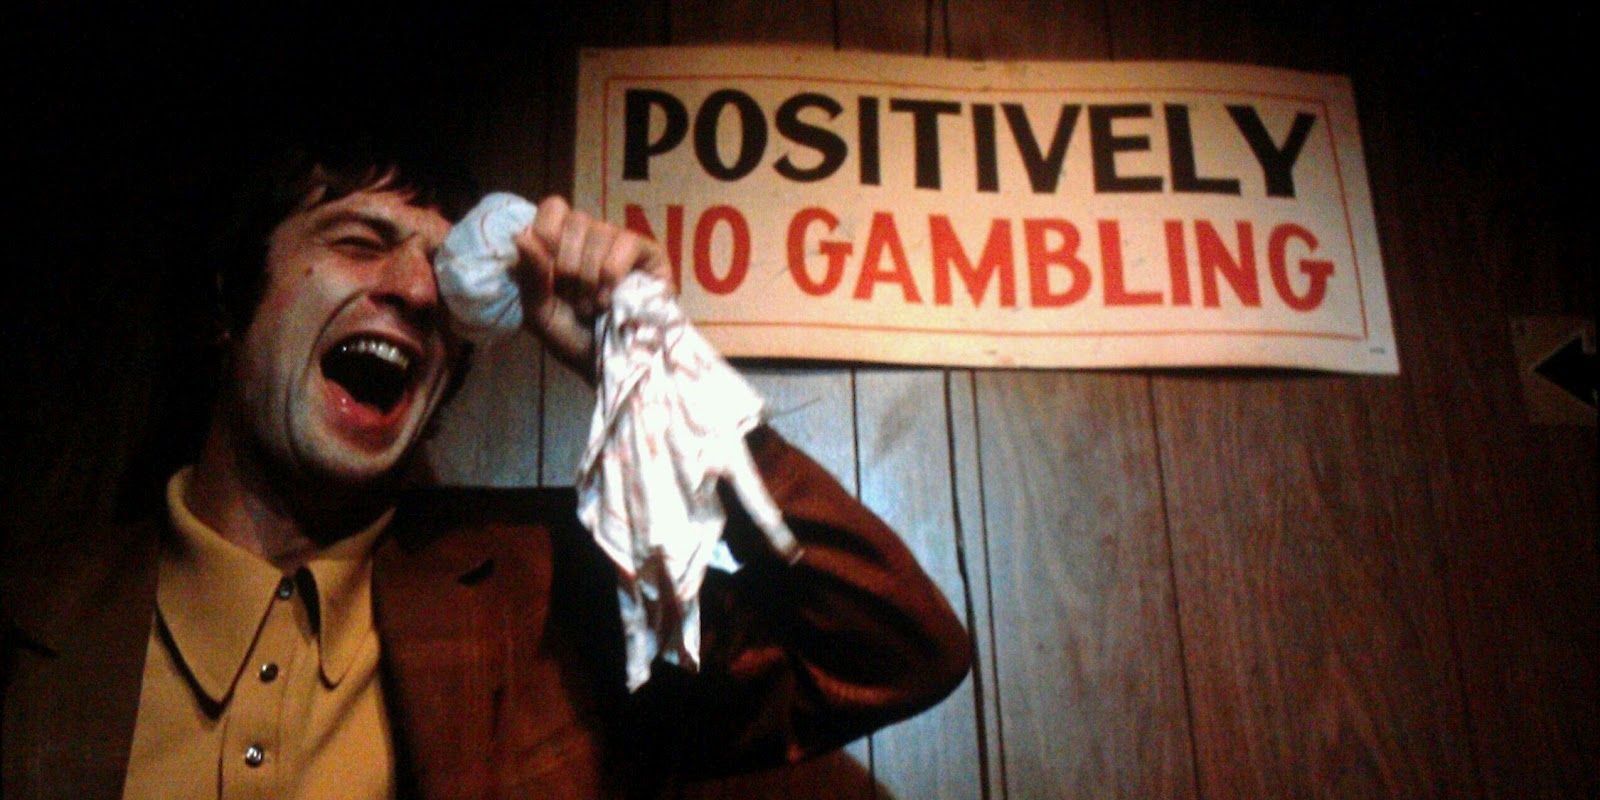 Robert De Niro laughs with a No Gambling sign behind him in Mean Streets